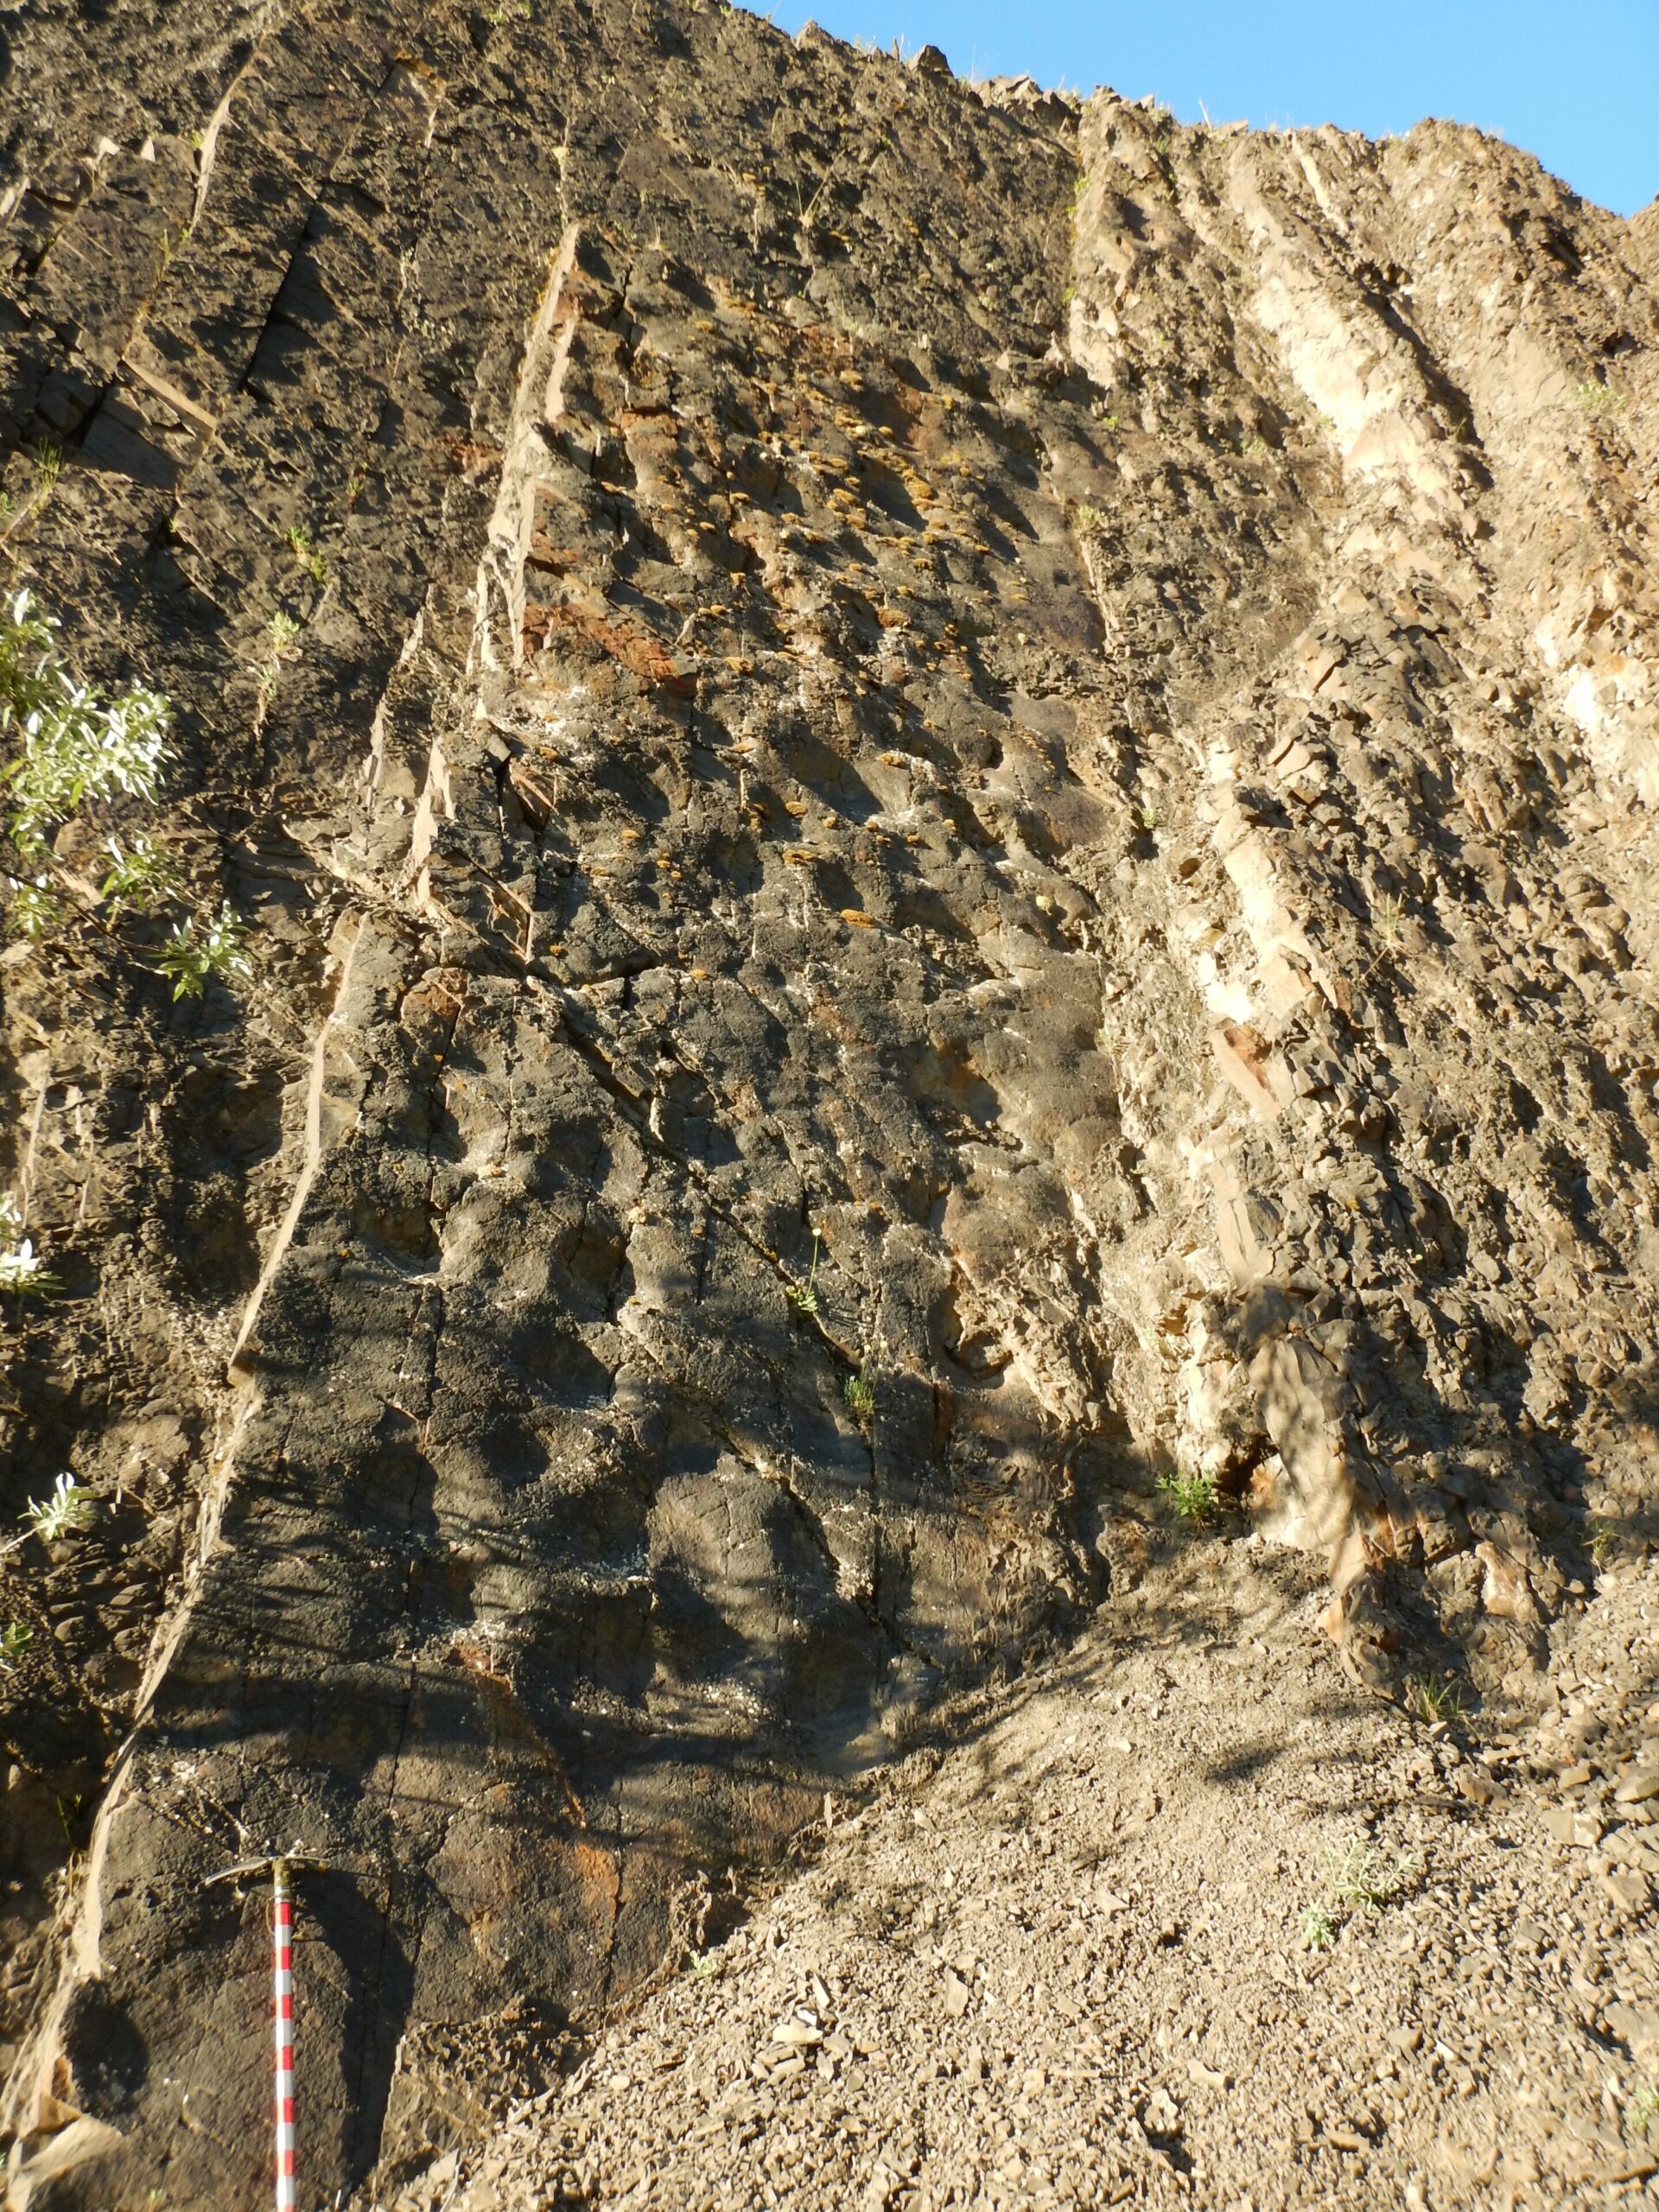 Close up image on one wall showing numerous depressions of hadrosaur footprints. The ice ax in the lower left of the frame is approximately 3 feet long, for scale.